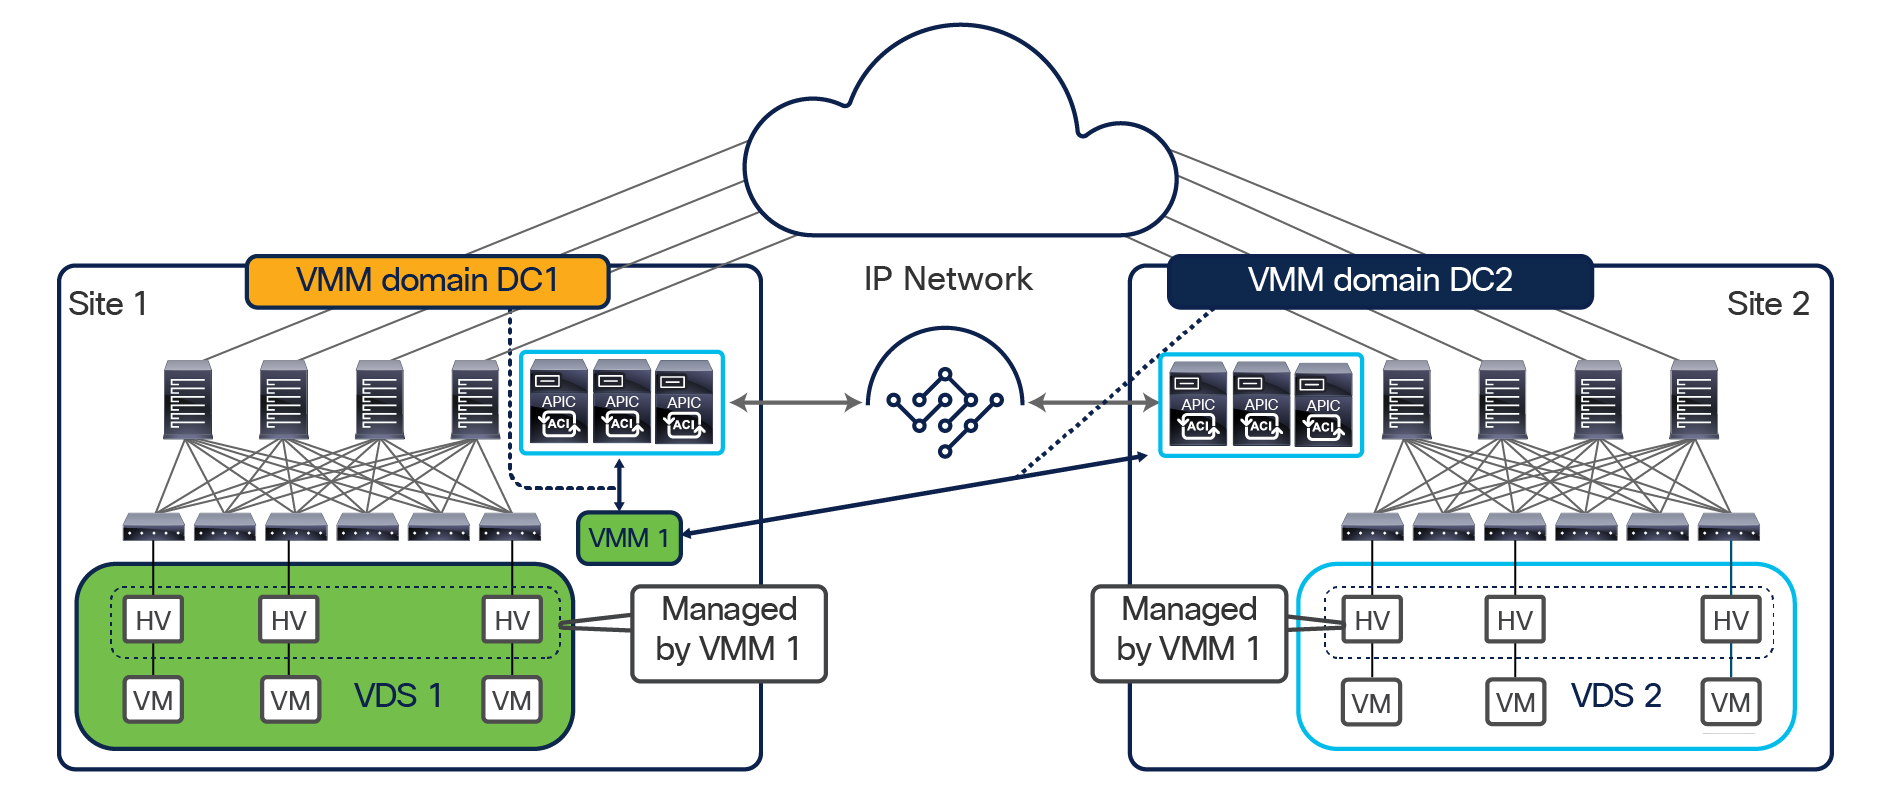 Summary of differences between Cisco ACI Multi-Pod and Cisco ACI Multi-Site architectures